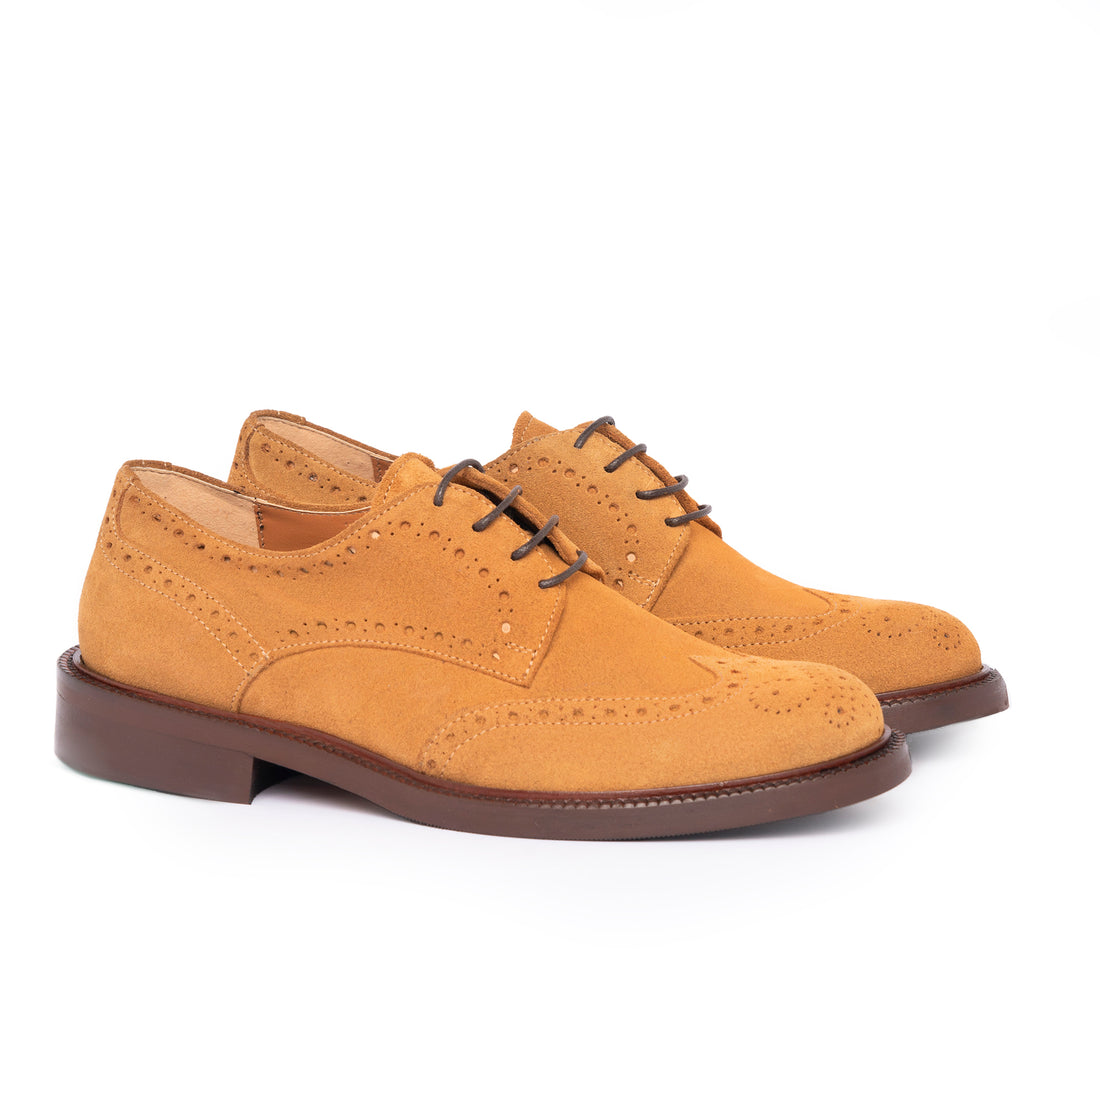 Oxford shoes in leather suede